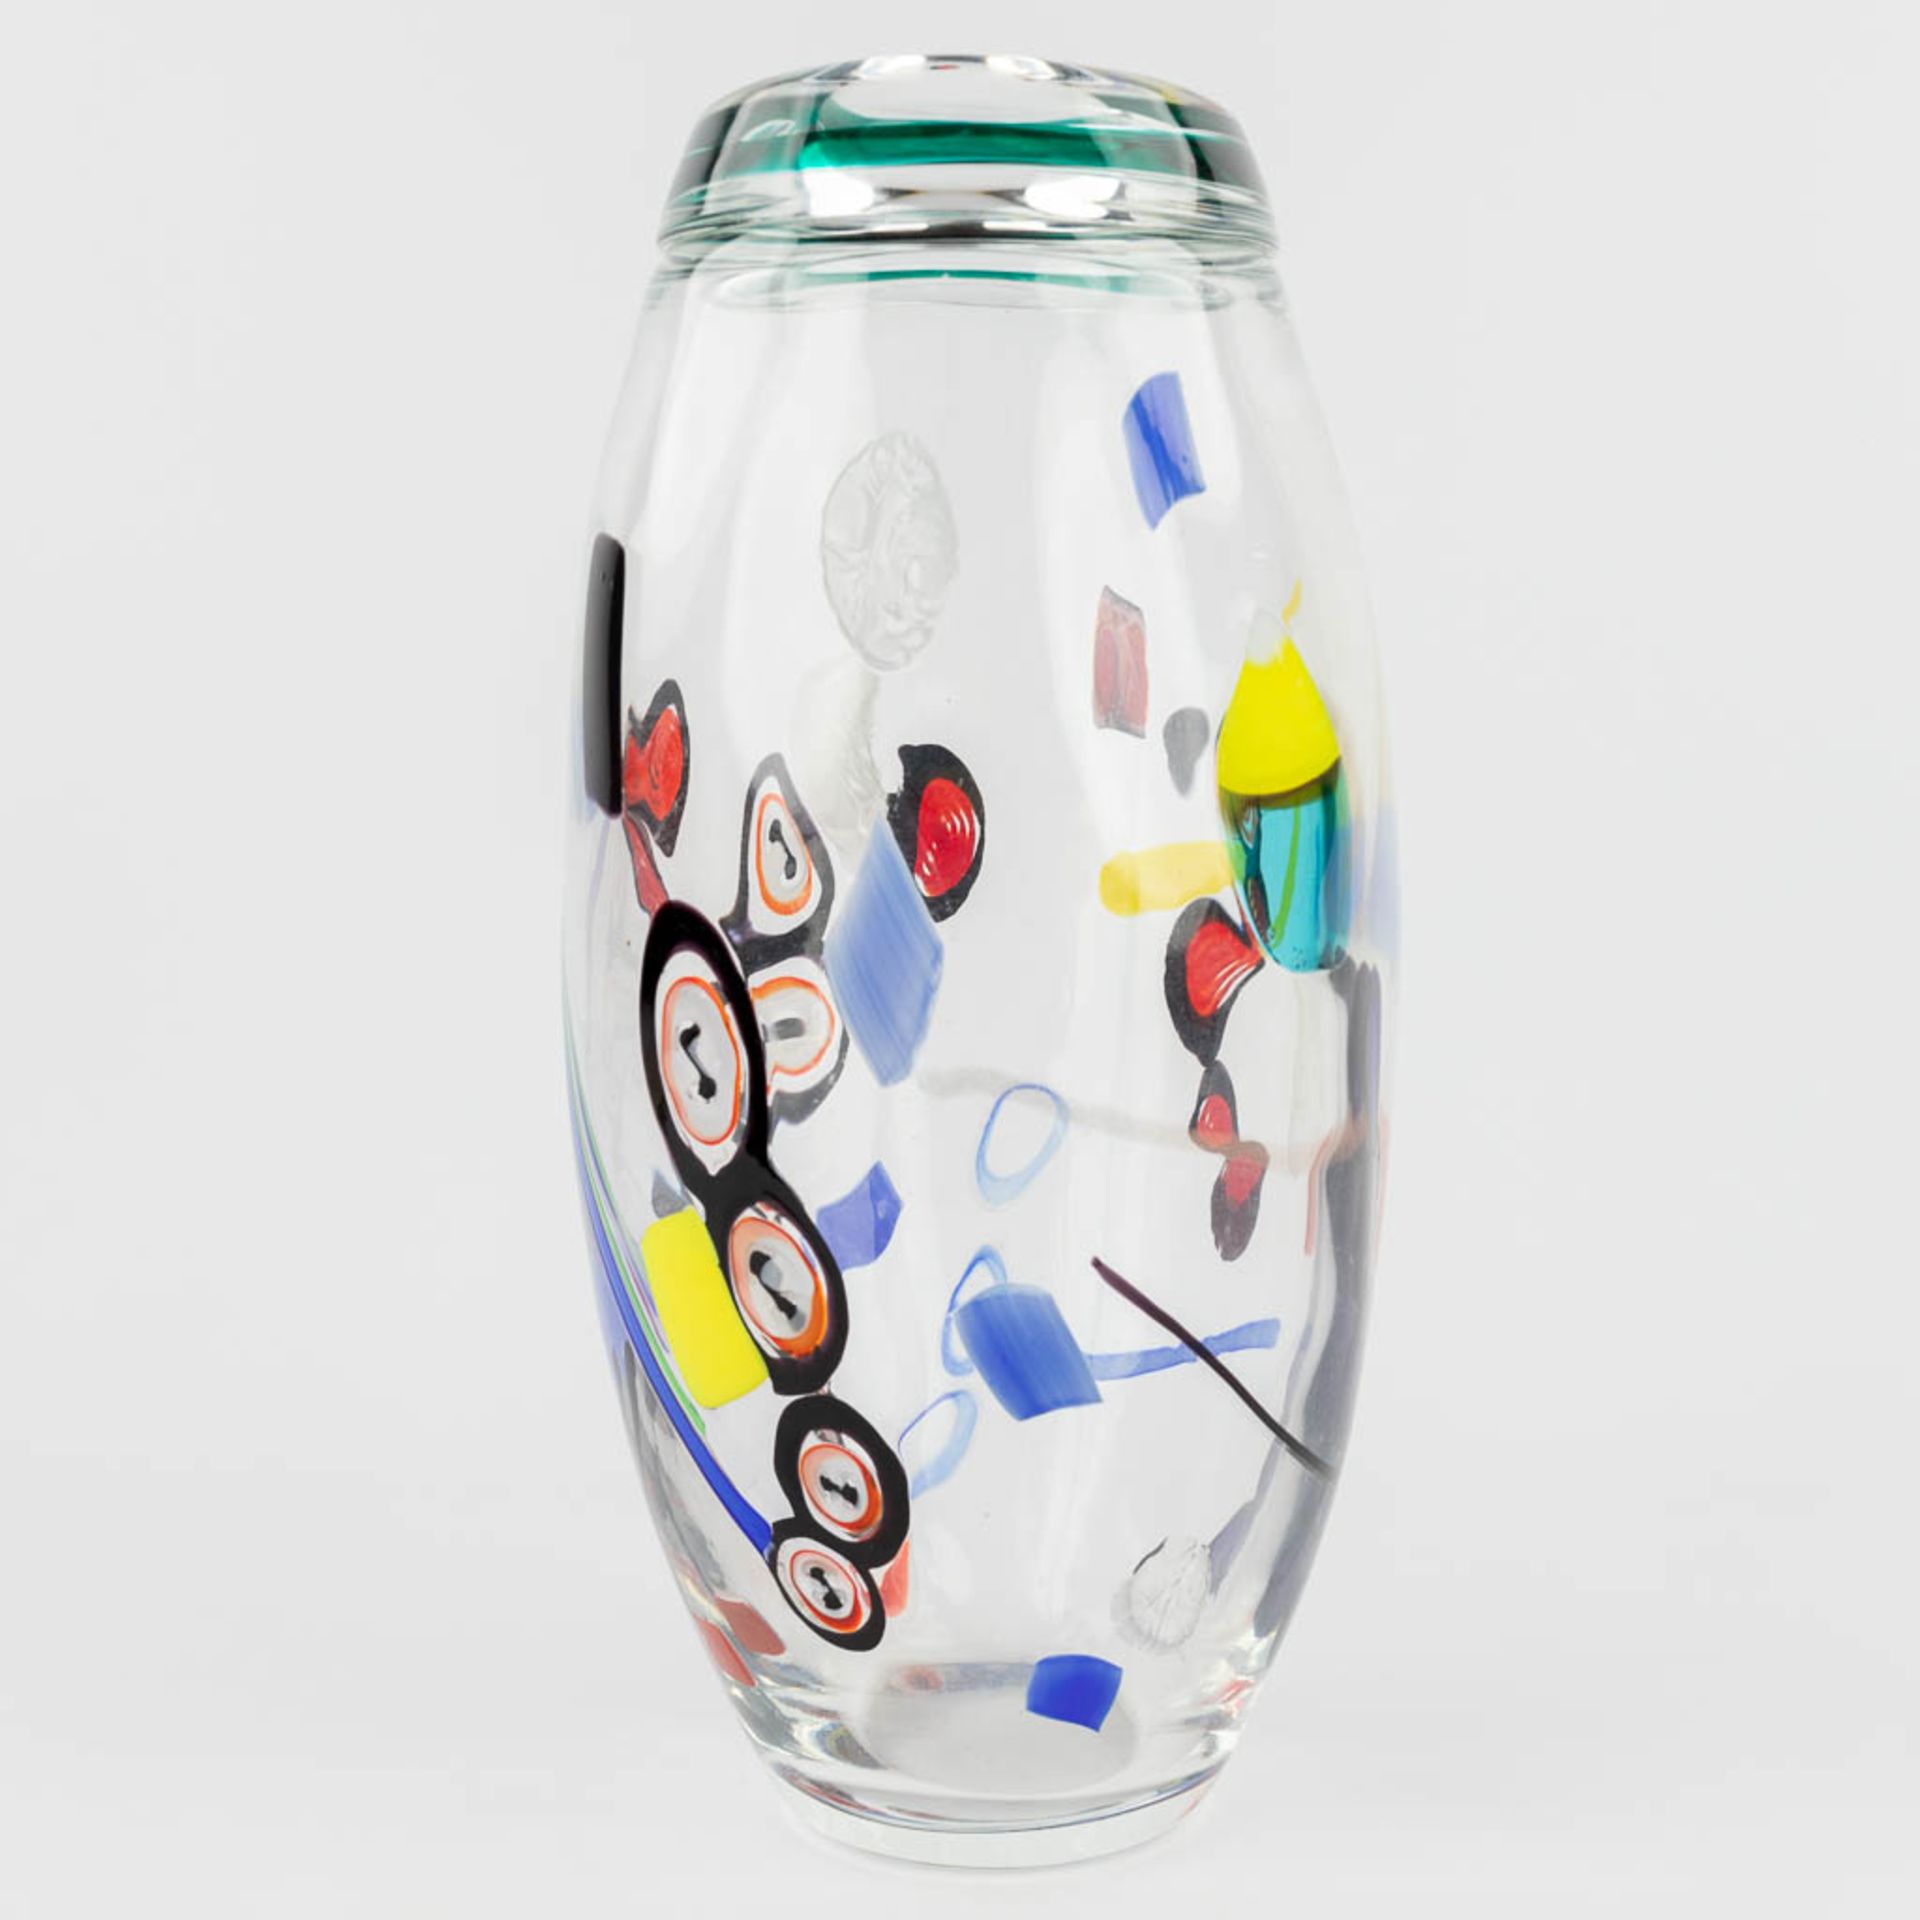 Seguso e Barovier, a large vase, glass art and made in Murano, Italy. (L: 23 x W: 27 x H: 45 cm) - Image 11 of 17